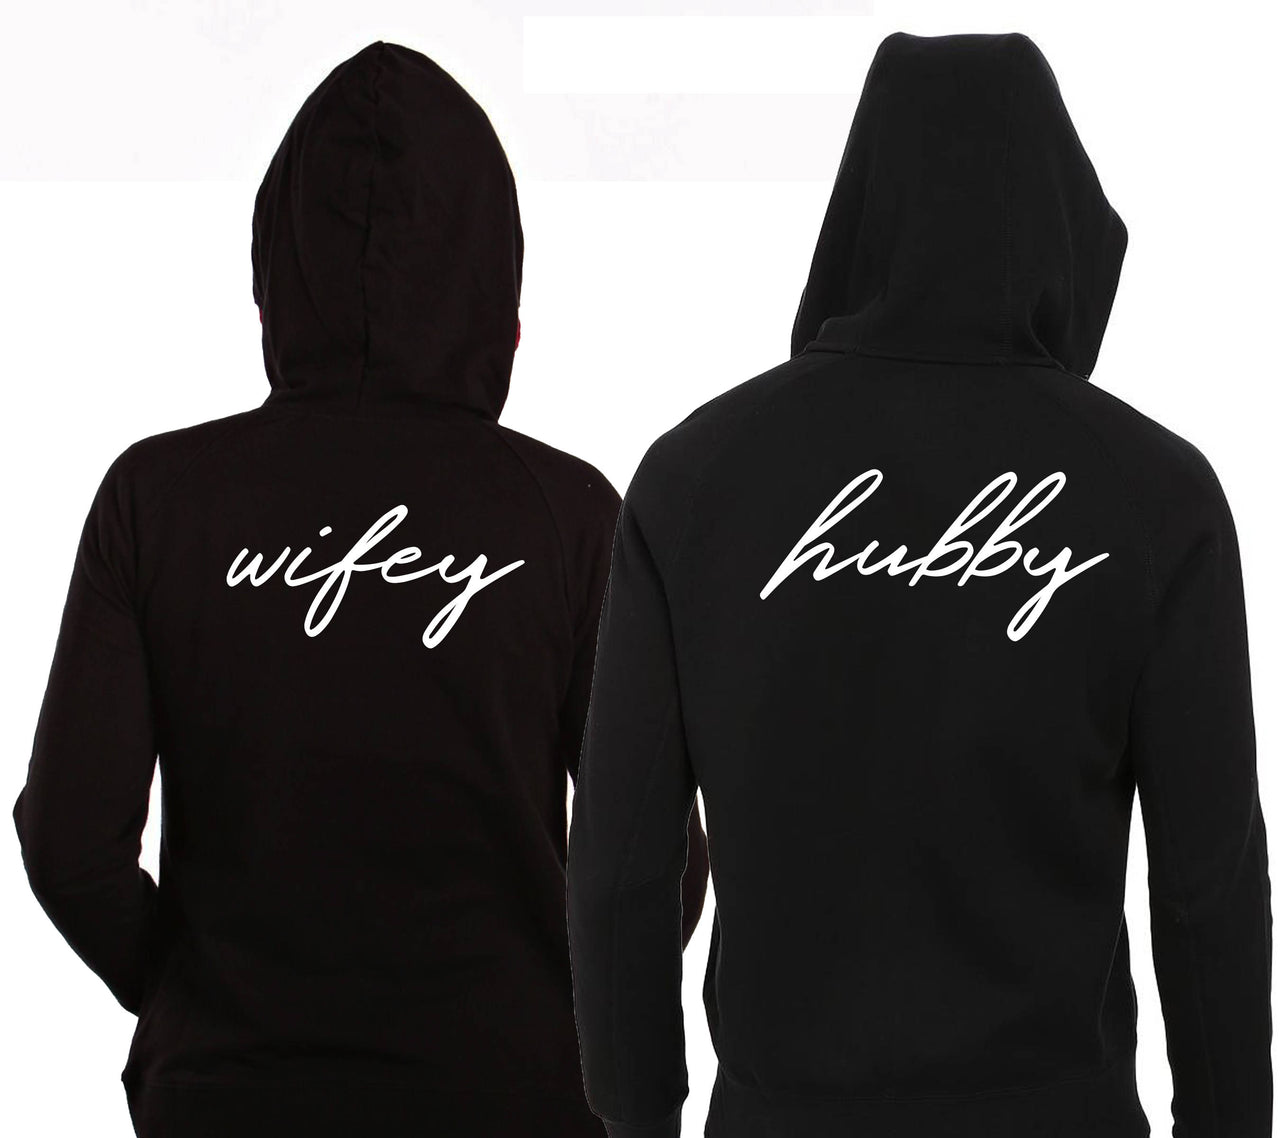 Hubby Wifey Couples Iron on Decals Hubby Wifey set heat transfer decal for wedding couples hoodies Hubby Wifey Vinyl Couples hoodie -CHT9HTV